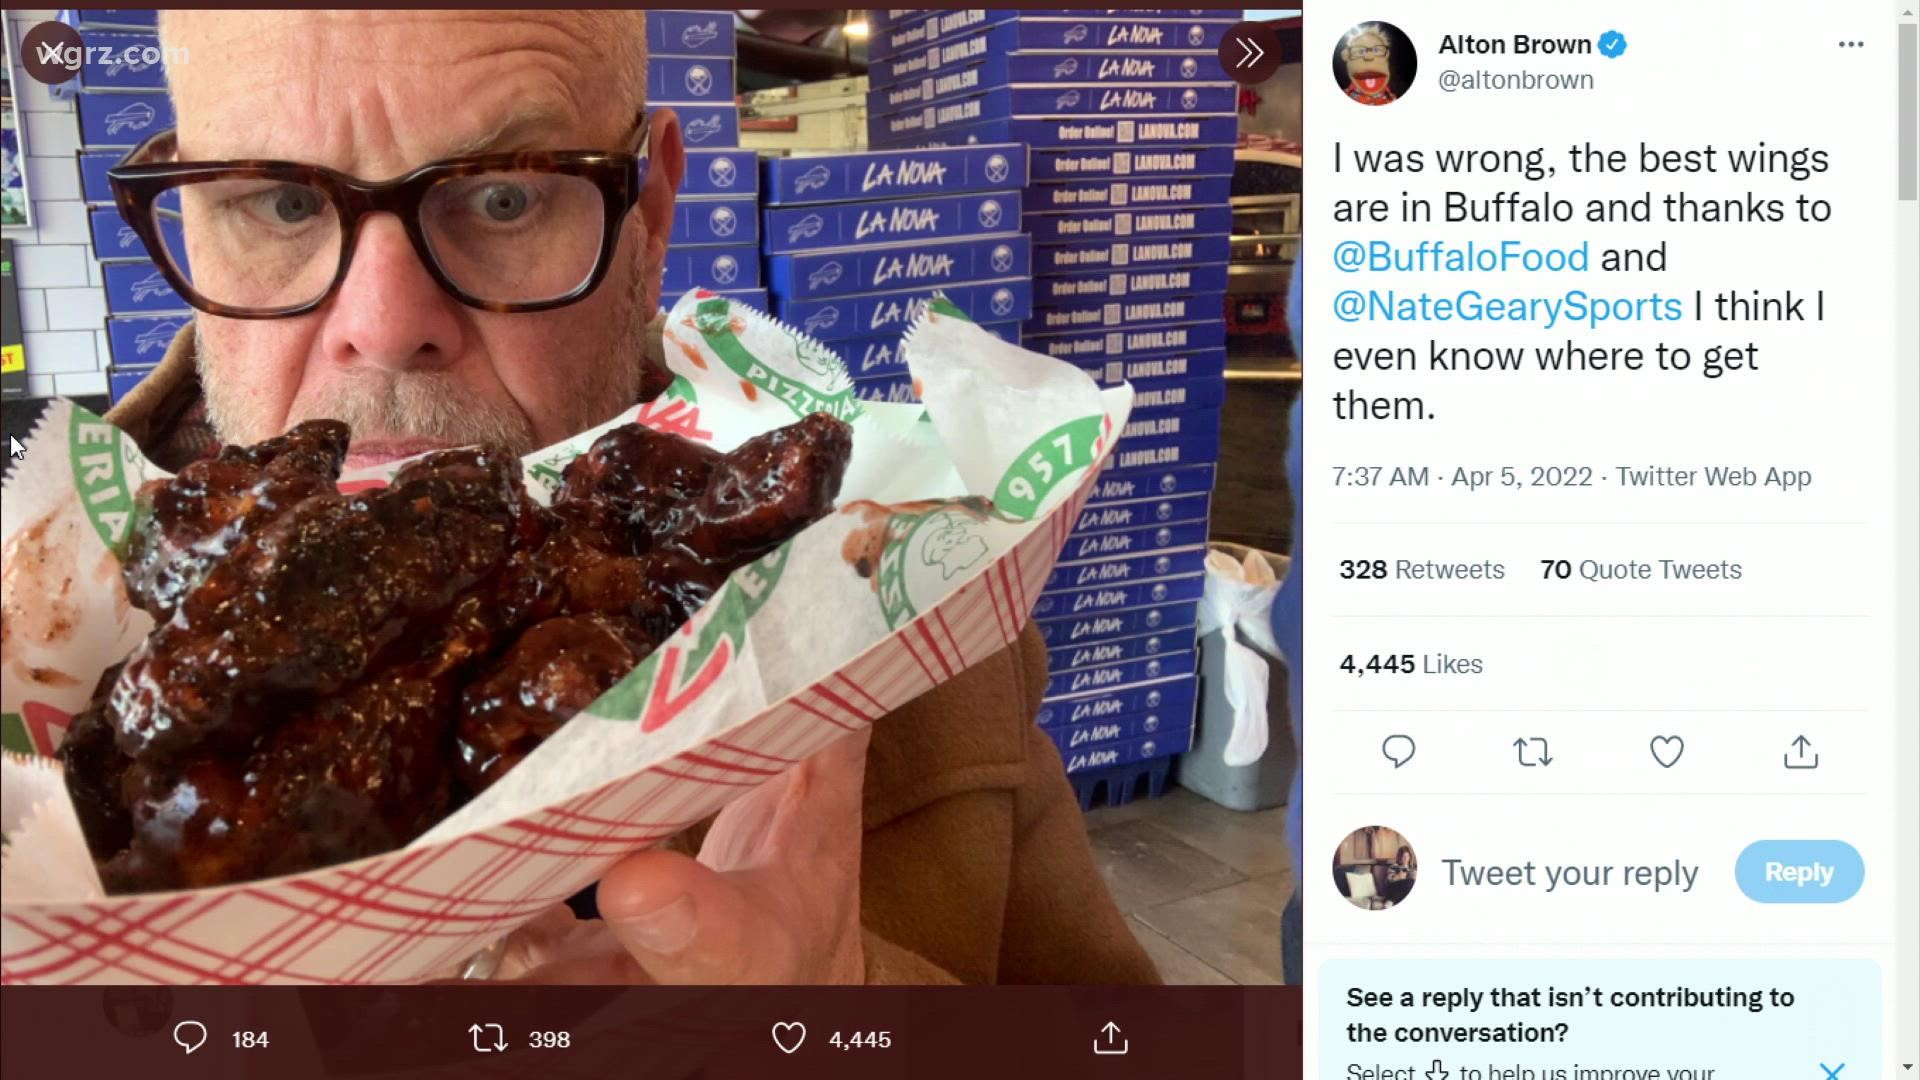 The Food Network chef returns to the Queen City to find the best wings after saying he had a 'very, very bad wing day' back in 2018.